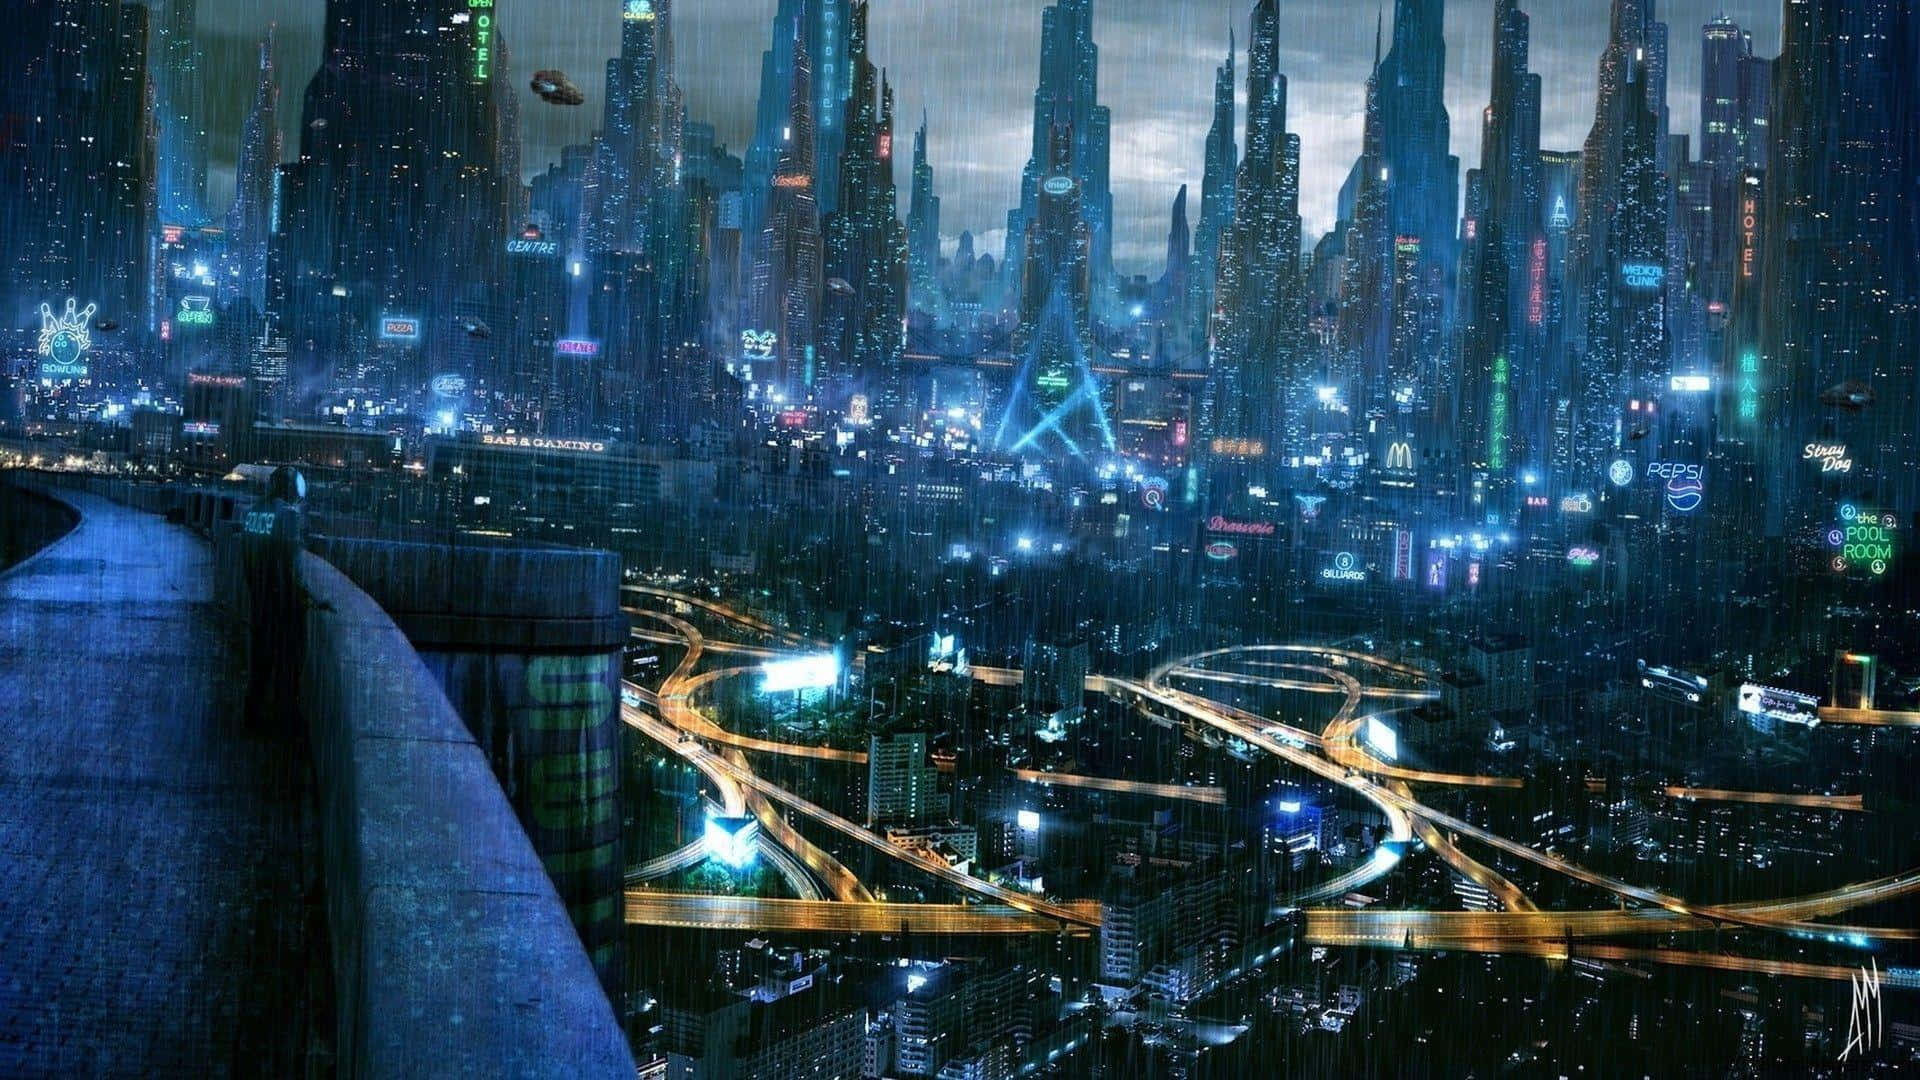 A Futuristic City With Many Buildings And Lights